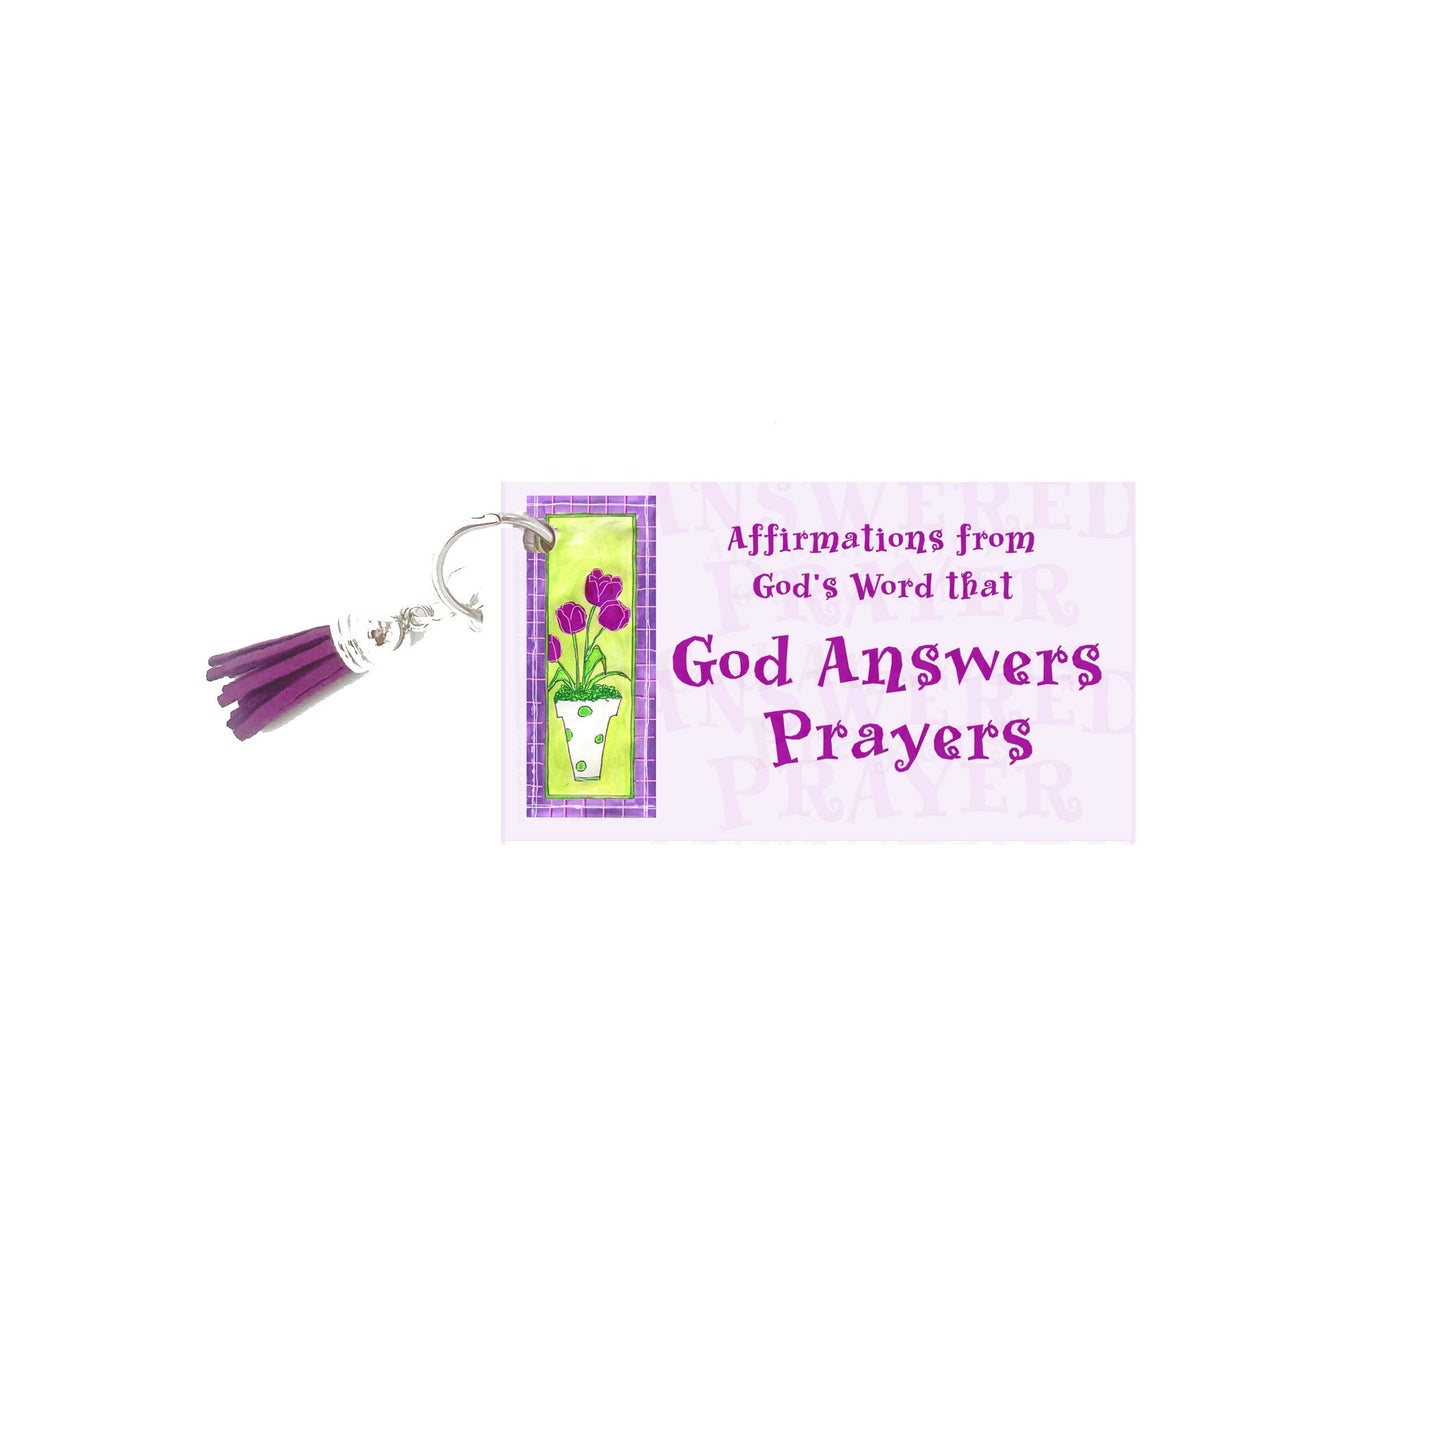 Affirmations from God - God Answers Prayers